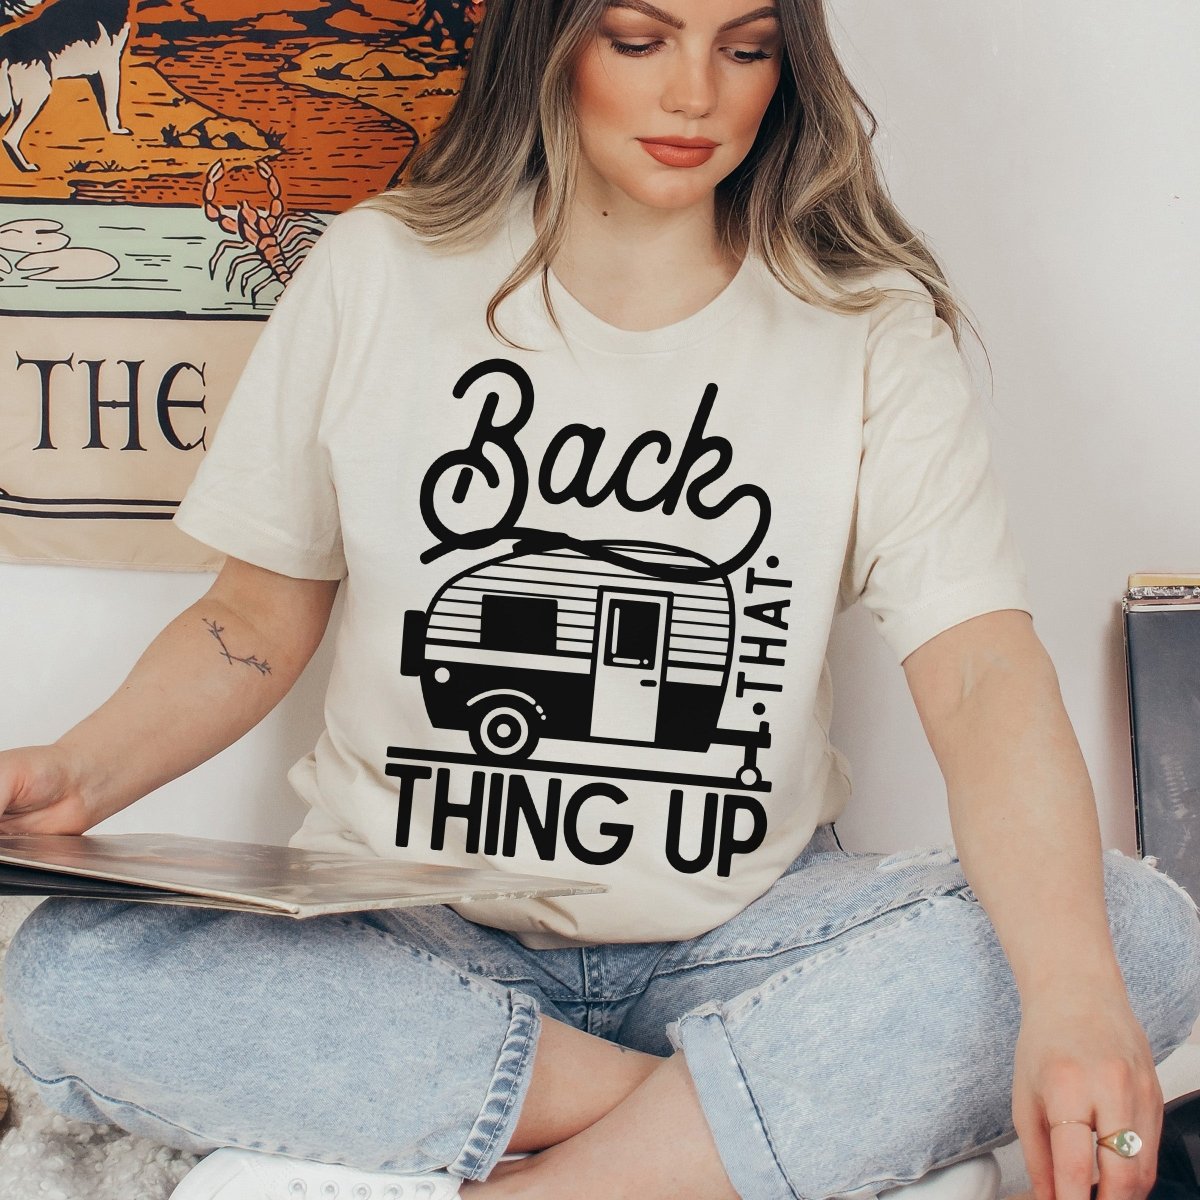 Back That Thing Up Tee - Limeberry Designs